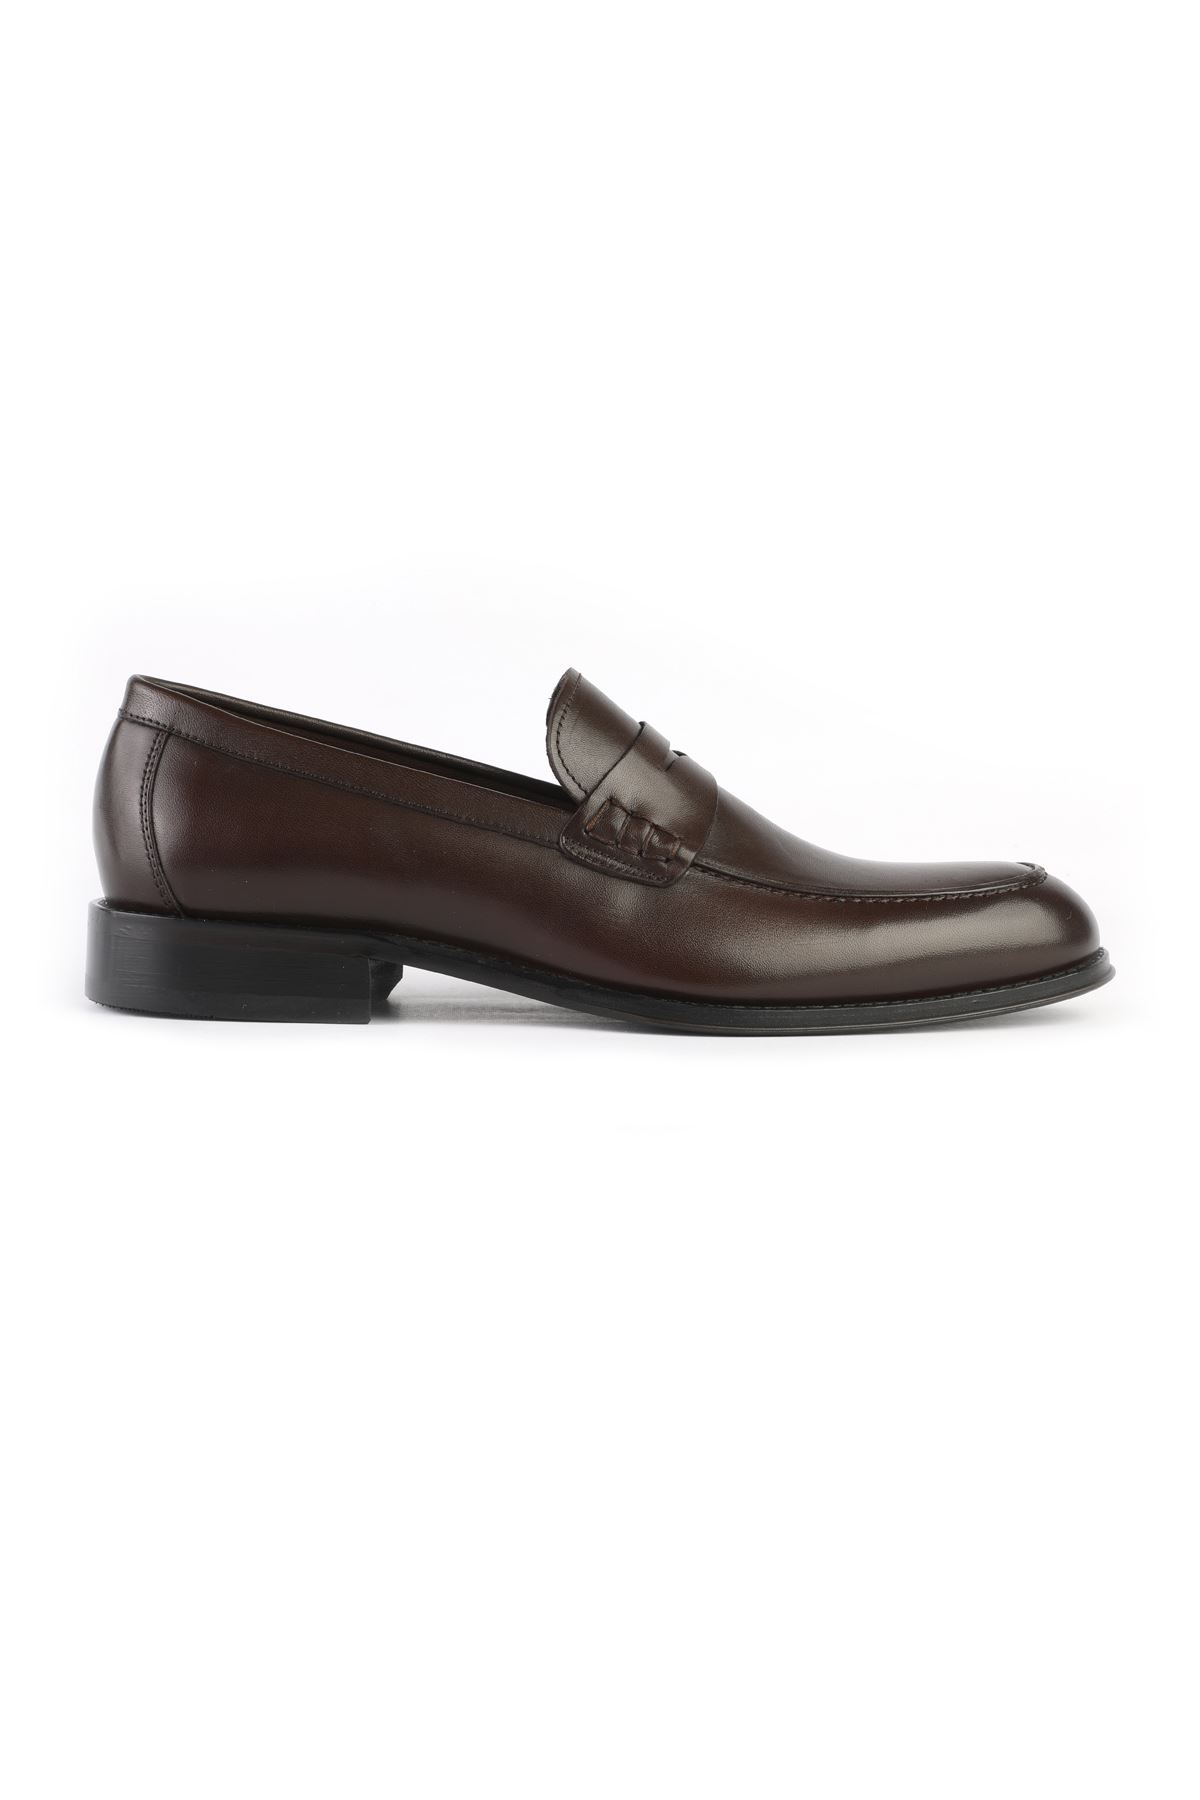 Libero 2402 Brown Loafer Shoes